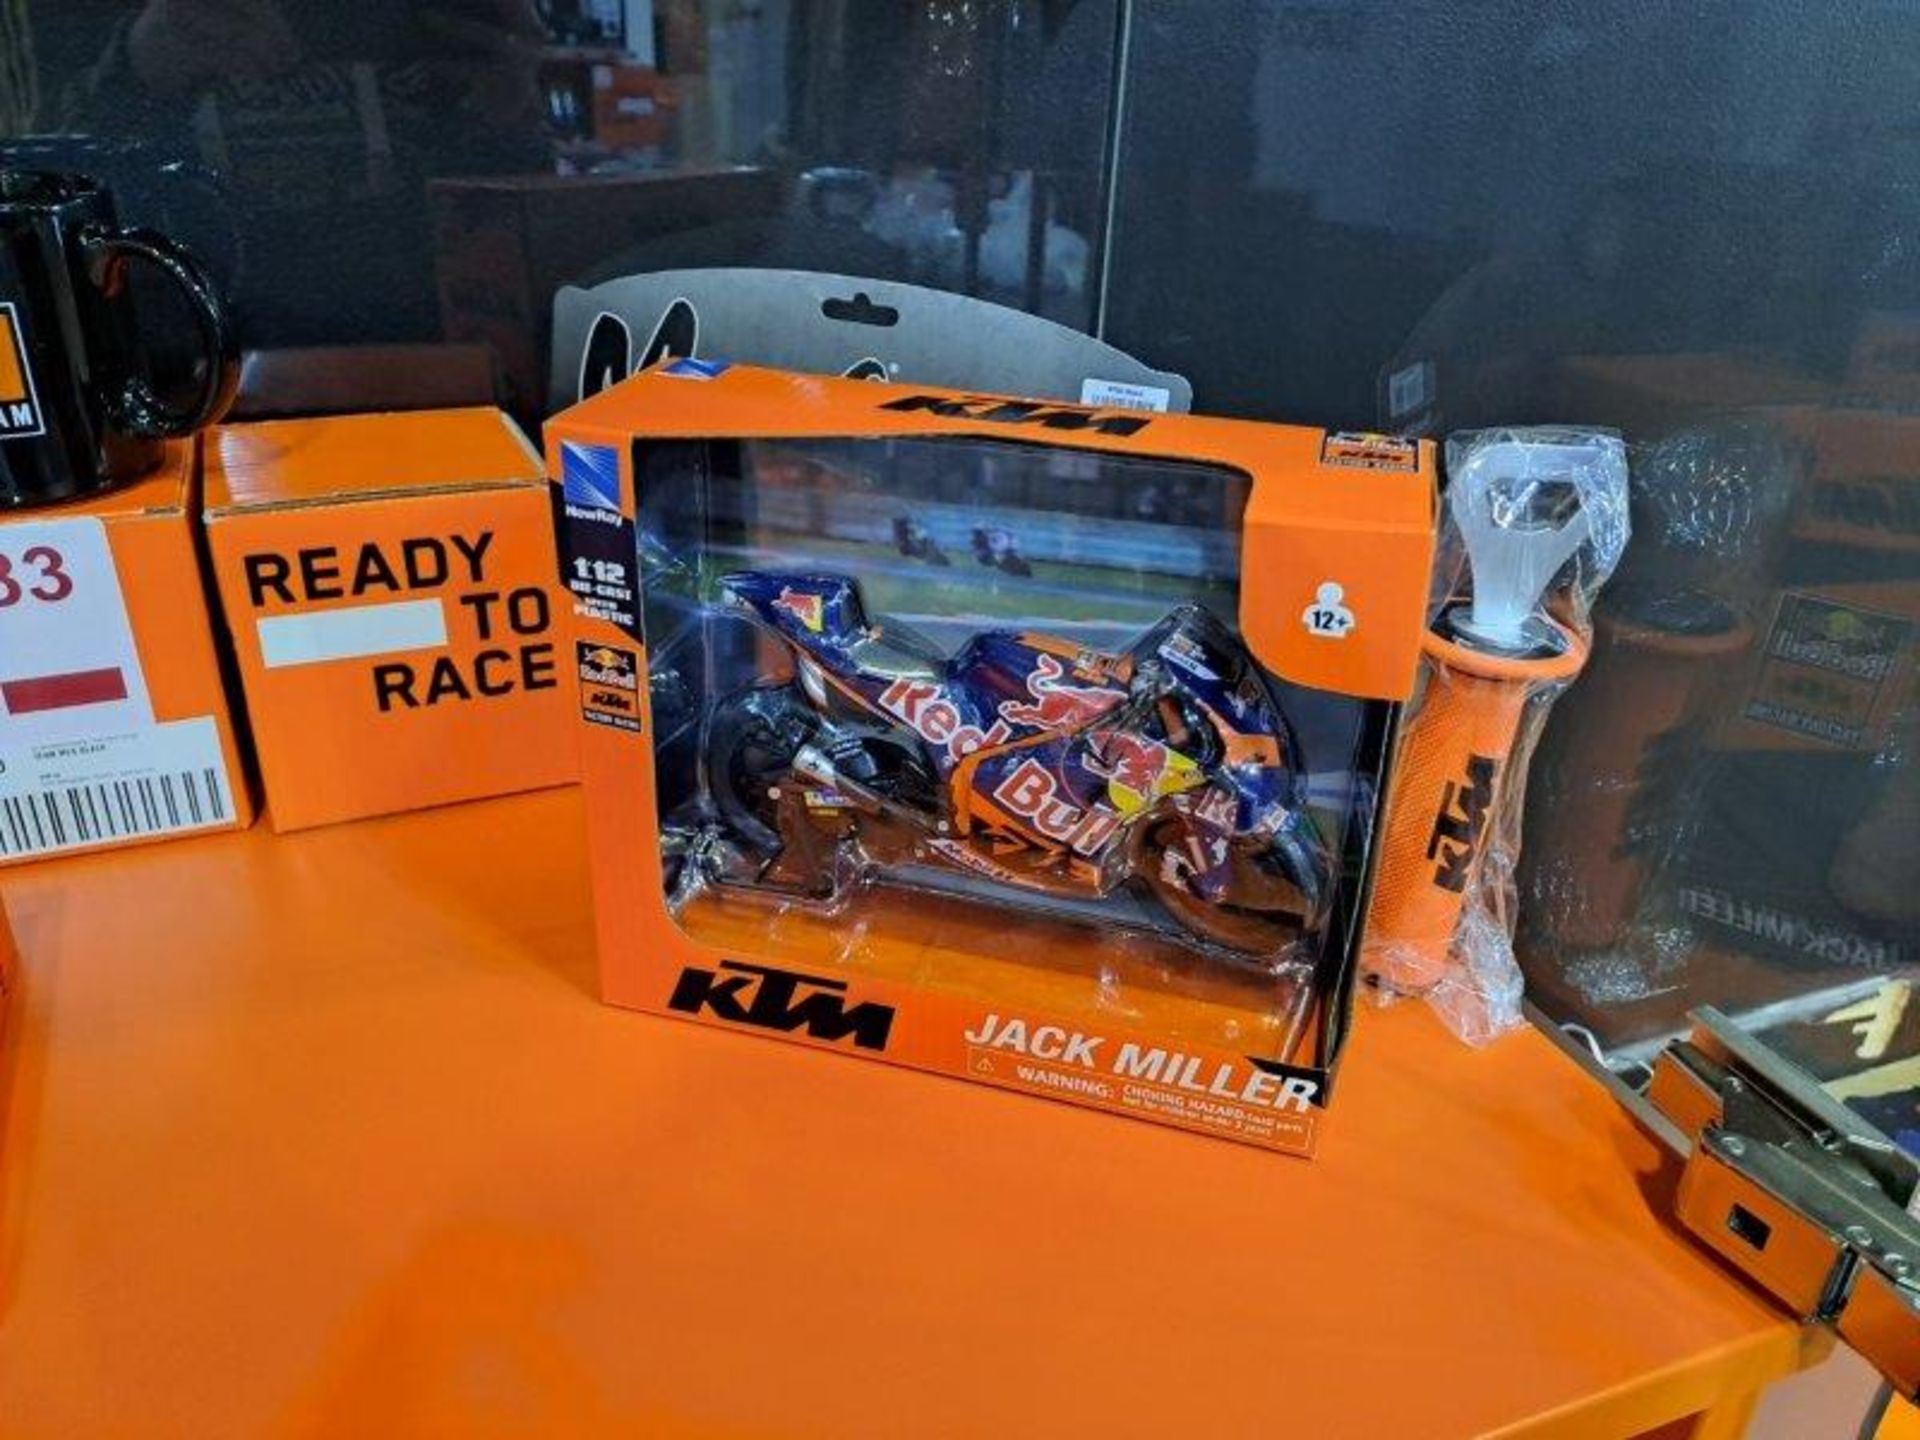 Contents of shelf of KTM Merchandise as pictured - Image 2 of 5